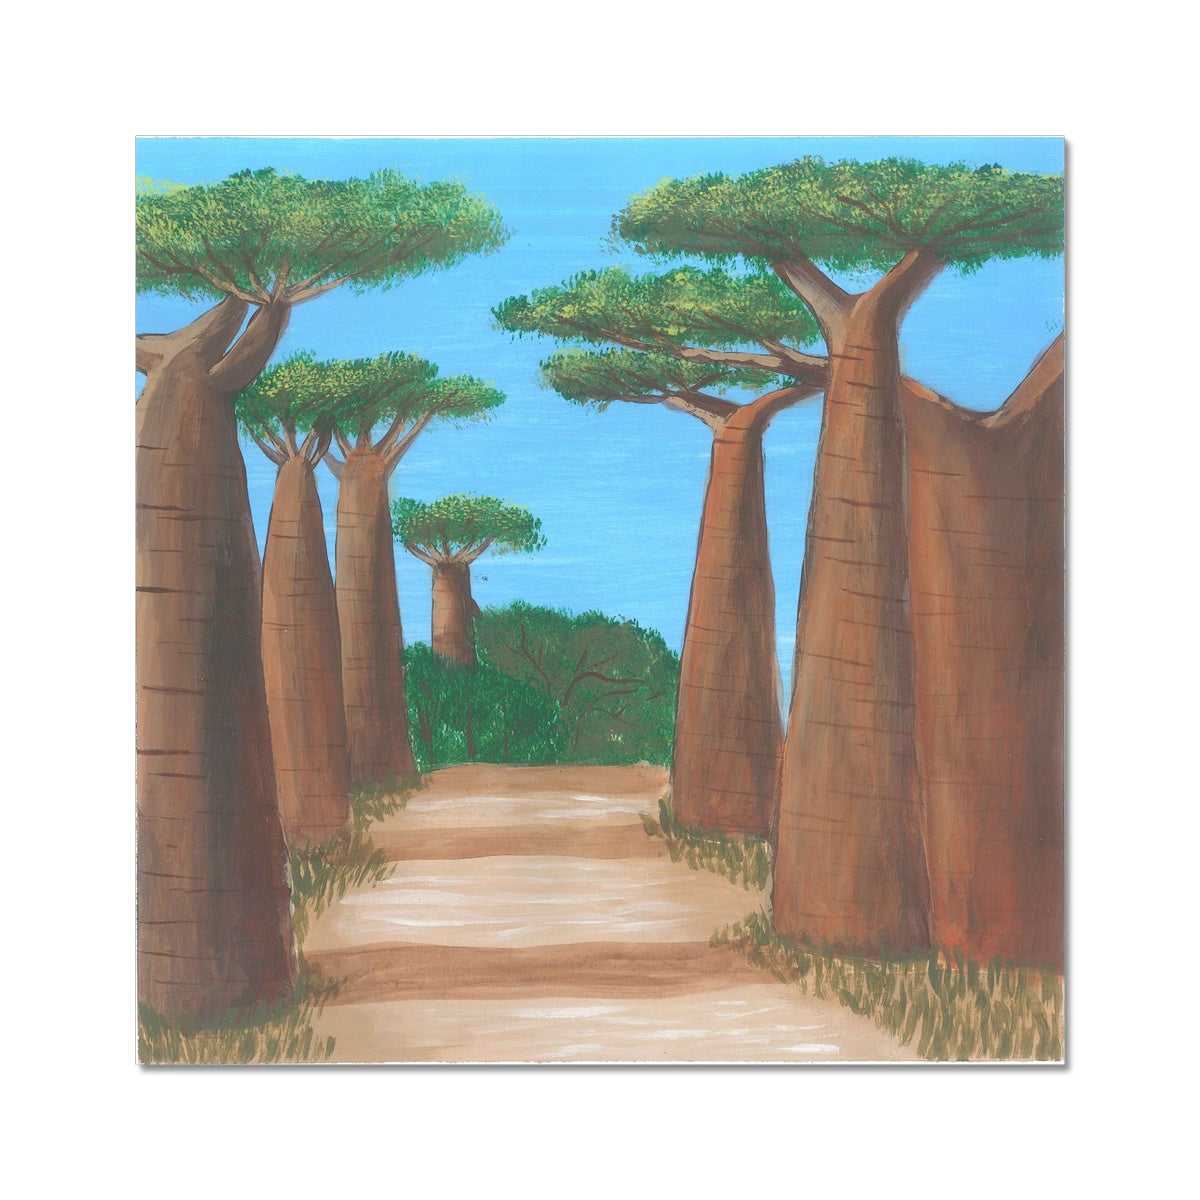 Nature and wildlife sounds – dawn in the South African bush - Pathway Under the Baobab Sentinels Fine Art Print - nature soundscape art - earth.fm